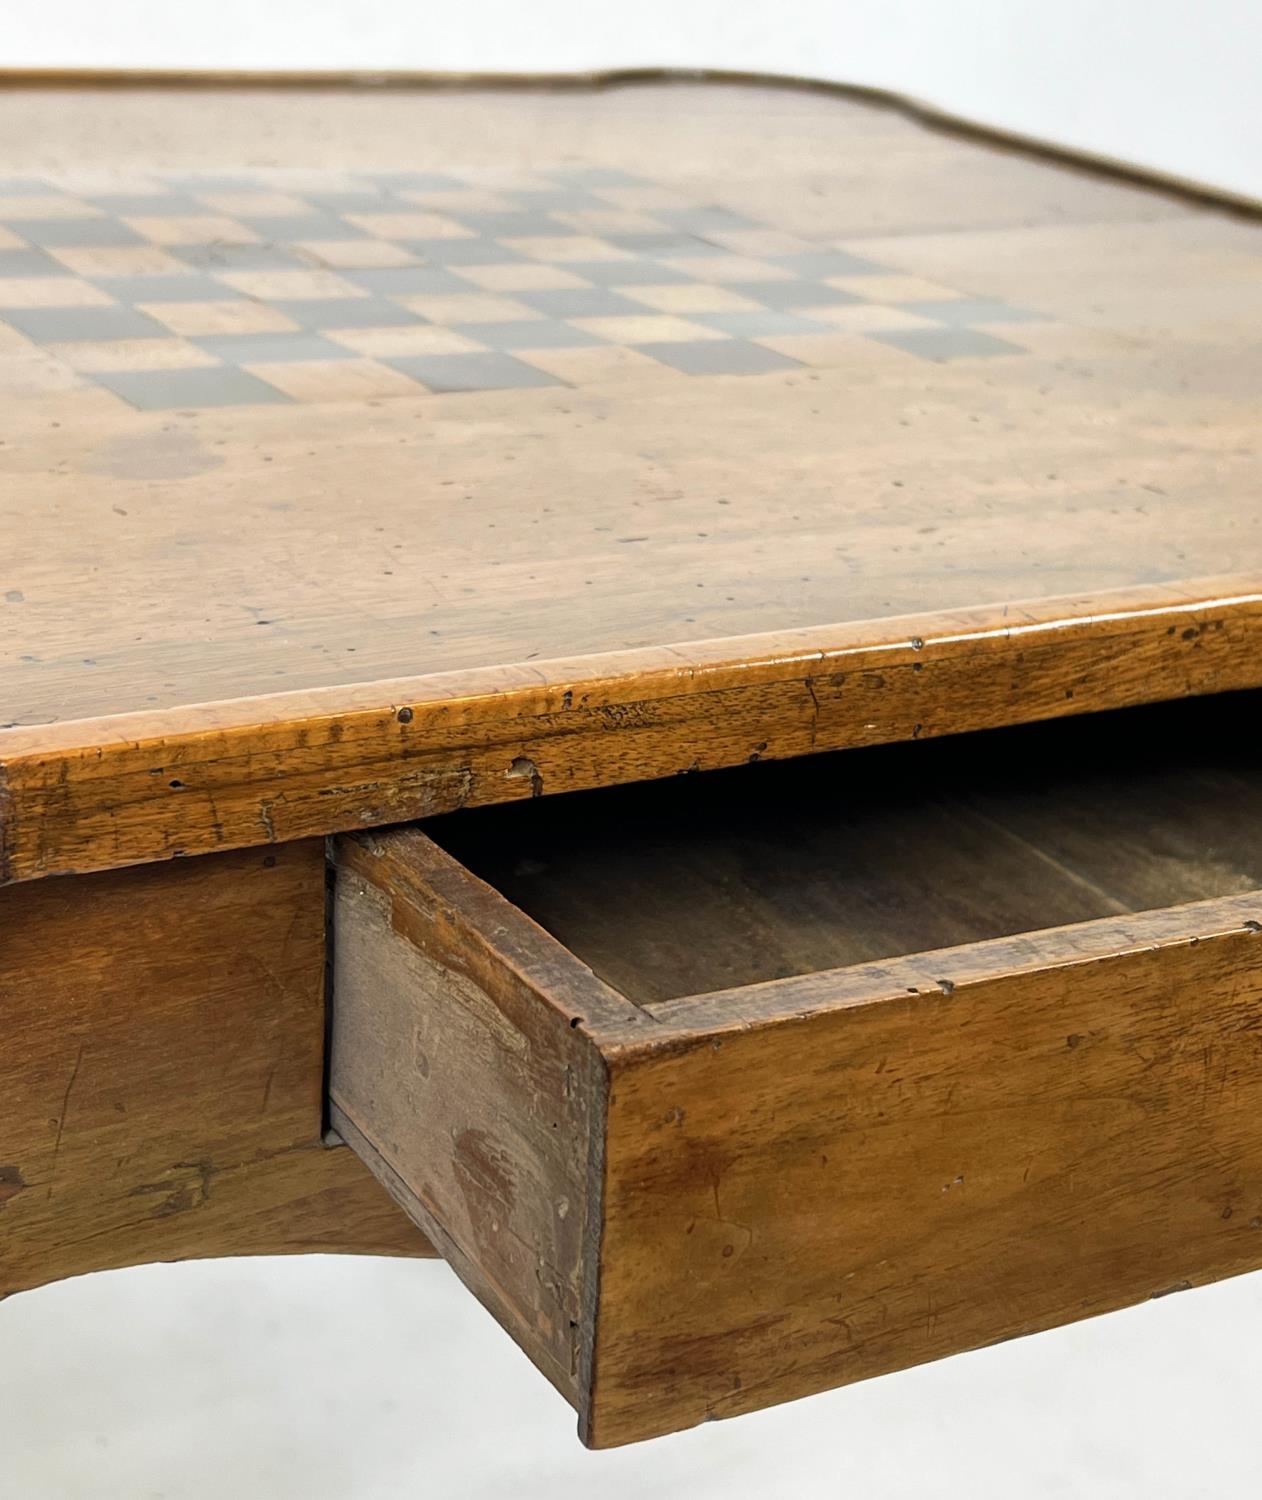 GAMES TABLE, 73cm H x 84cm W x 82cm D 18th century Italian walnut with chessboard inlaid top and - Image 4 of 7